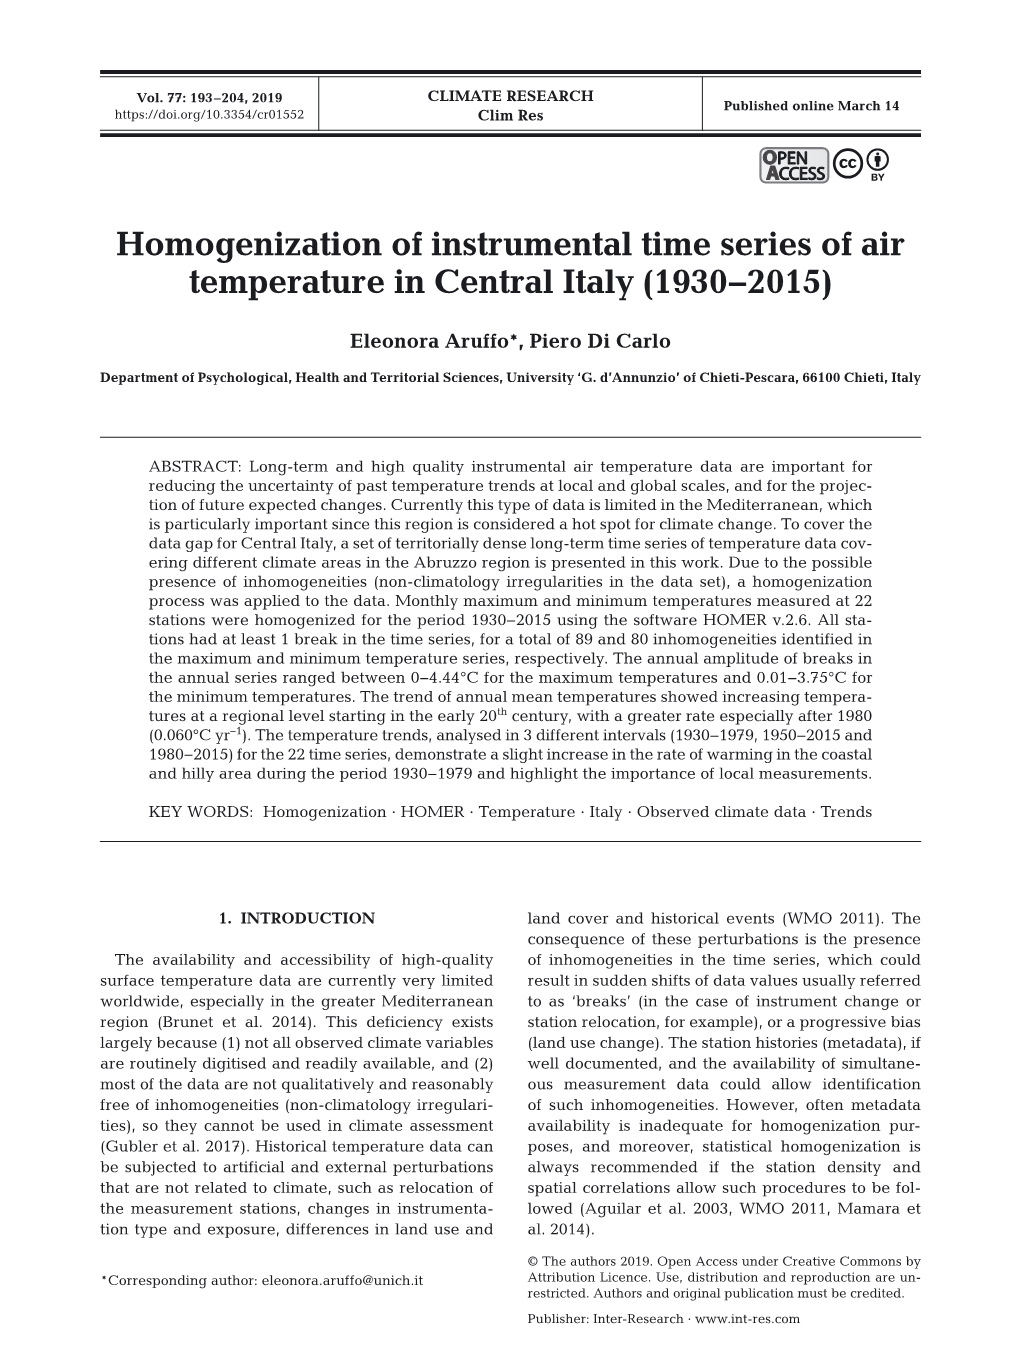 Homogenization of Instrumental Time Series of Air Temperature in Central Italy (1930−2015)